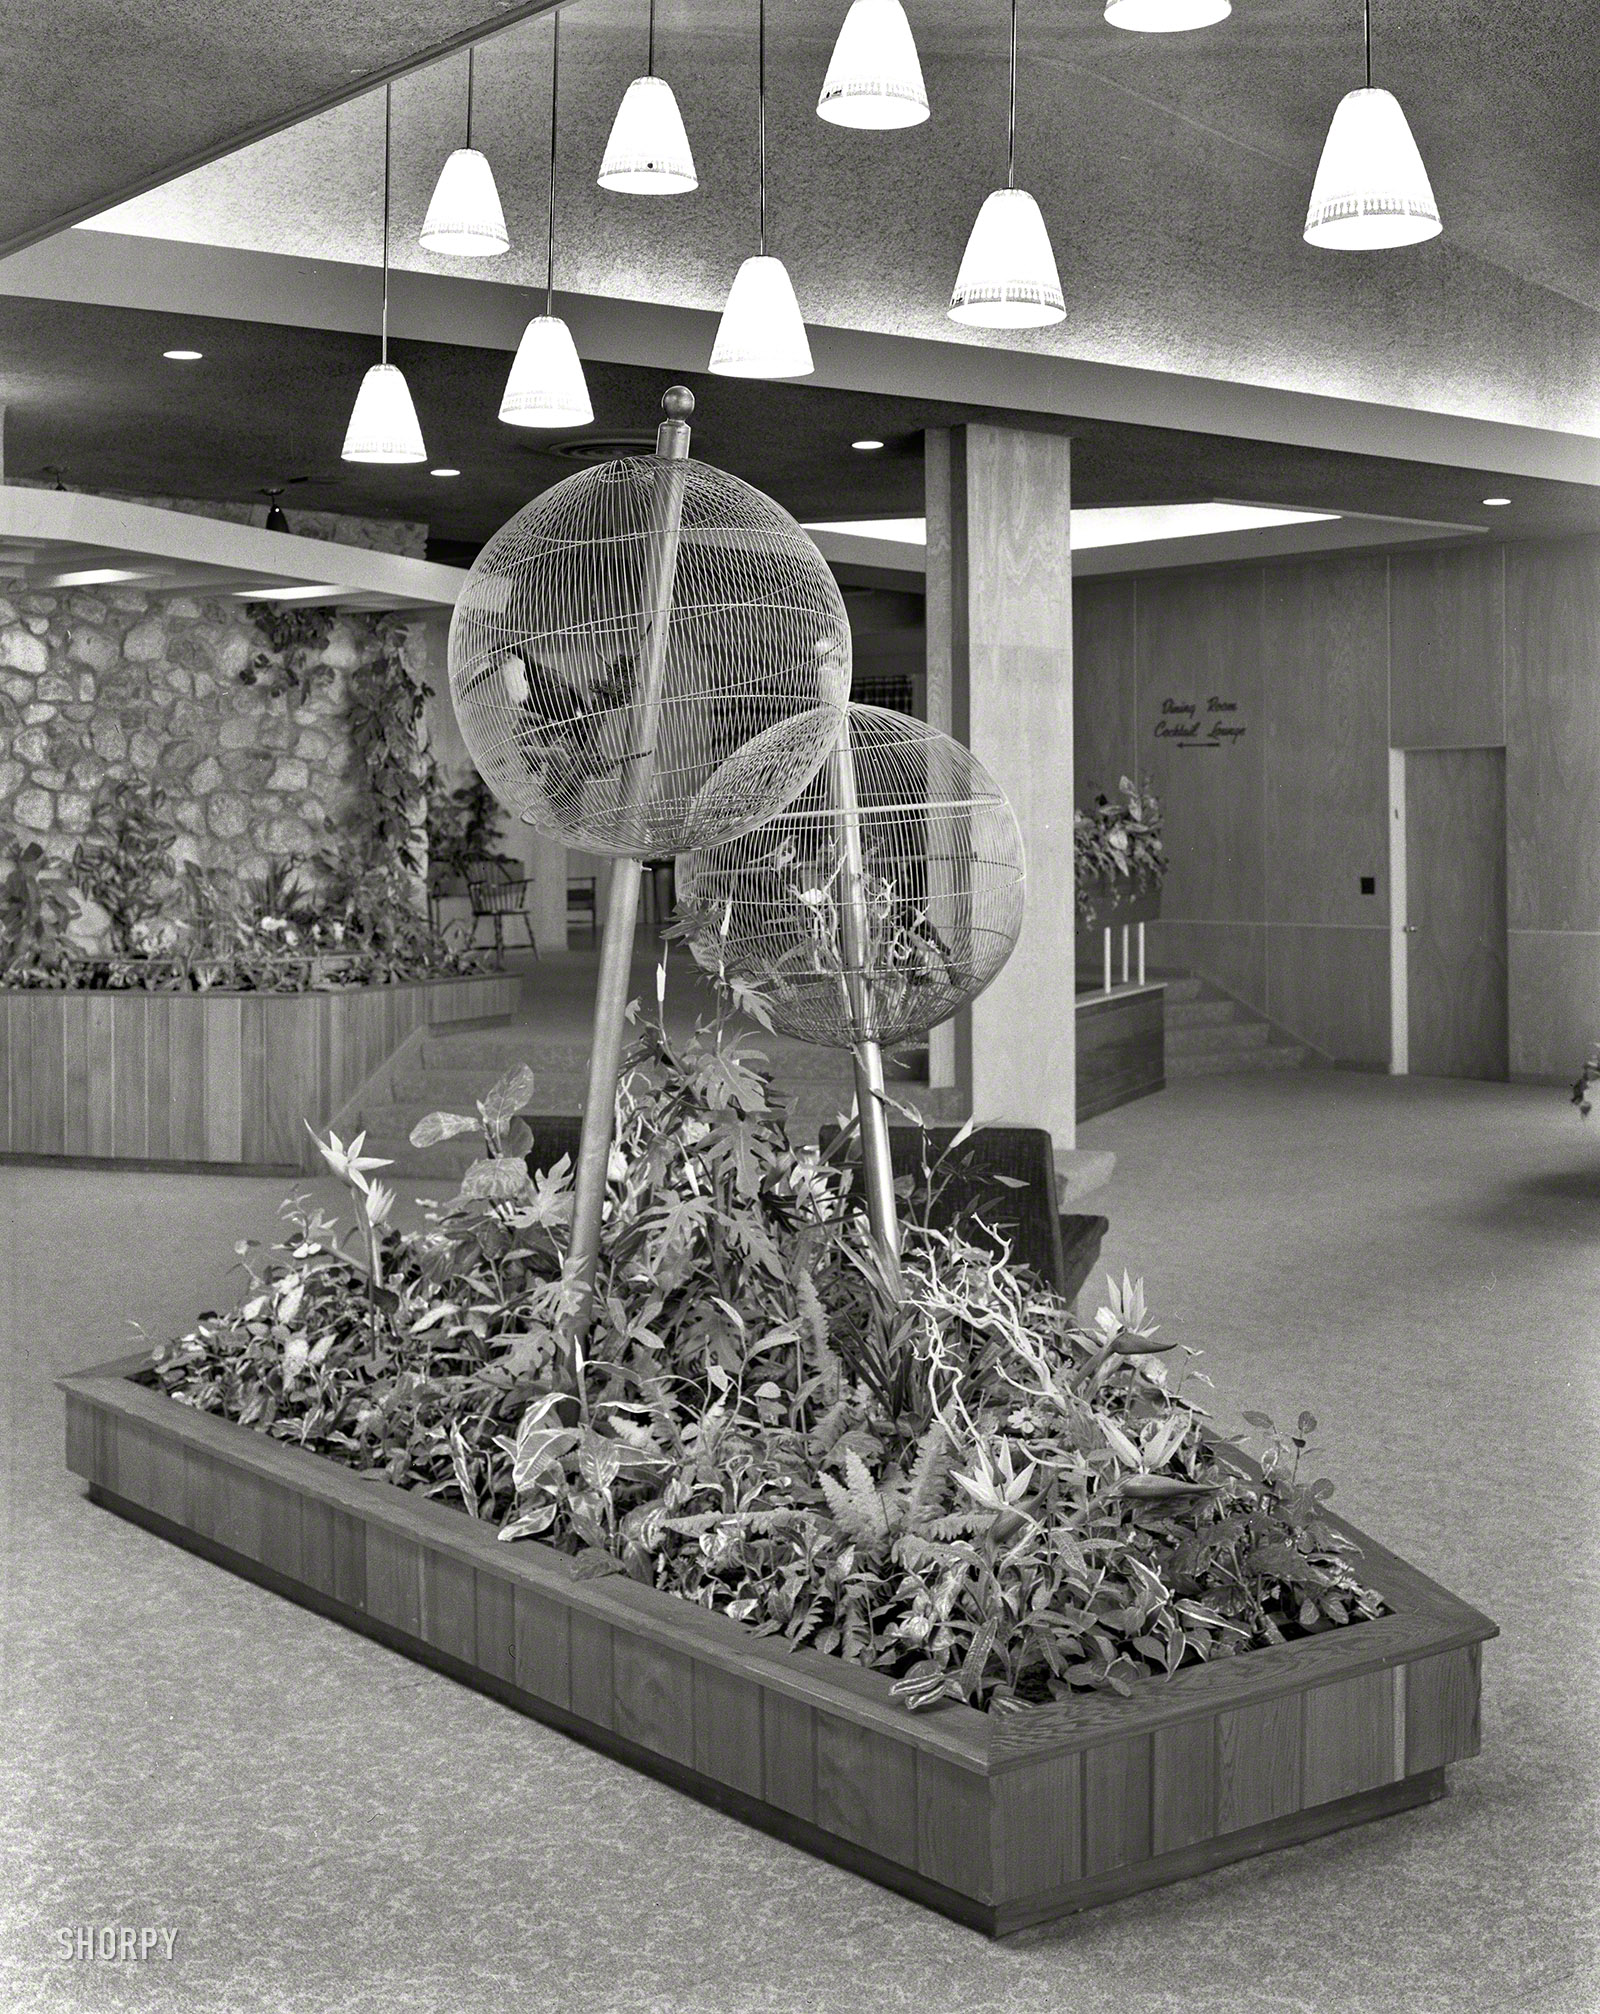 August 13, 1957. "Tamarack Lodge, Greenfield Park, New York. Lobby to cages." Another defunct Catskills resort. Gottscho-Schleisner photo. View full size.